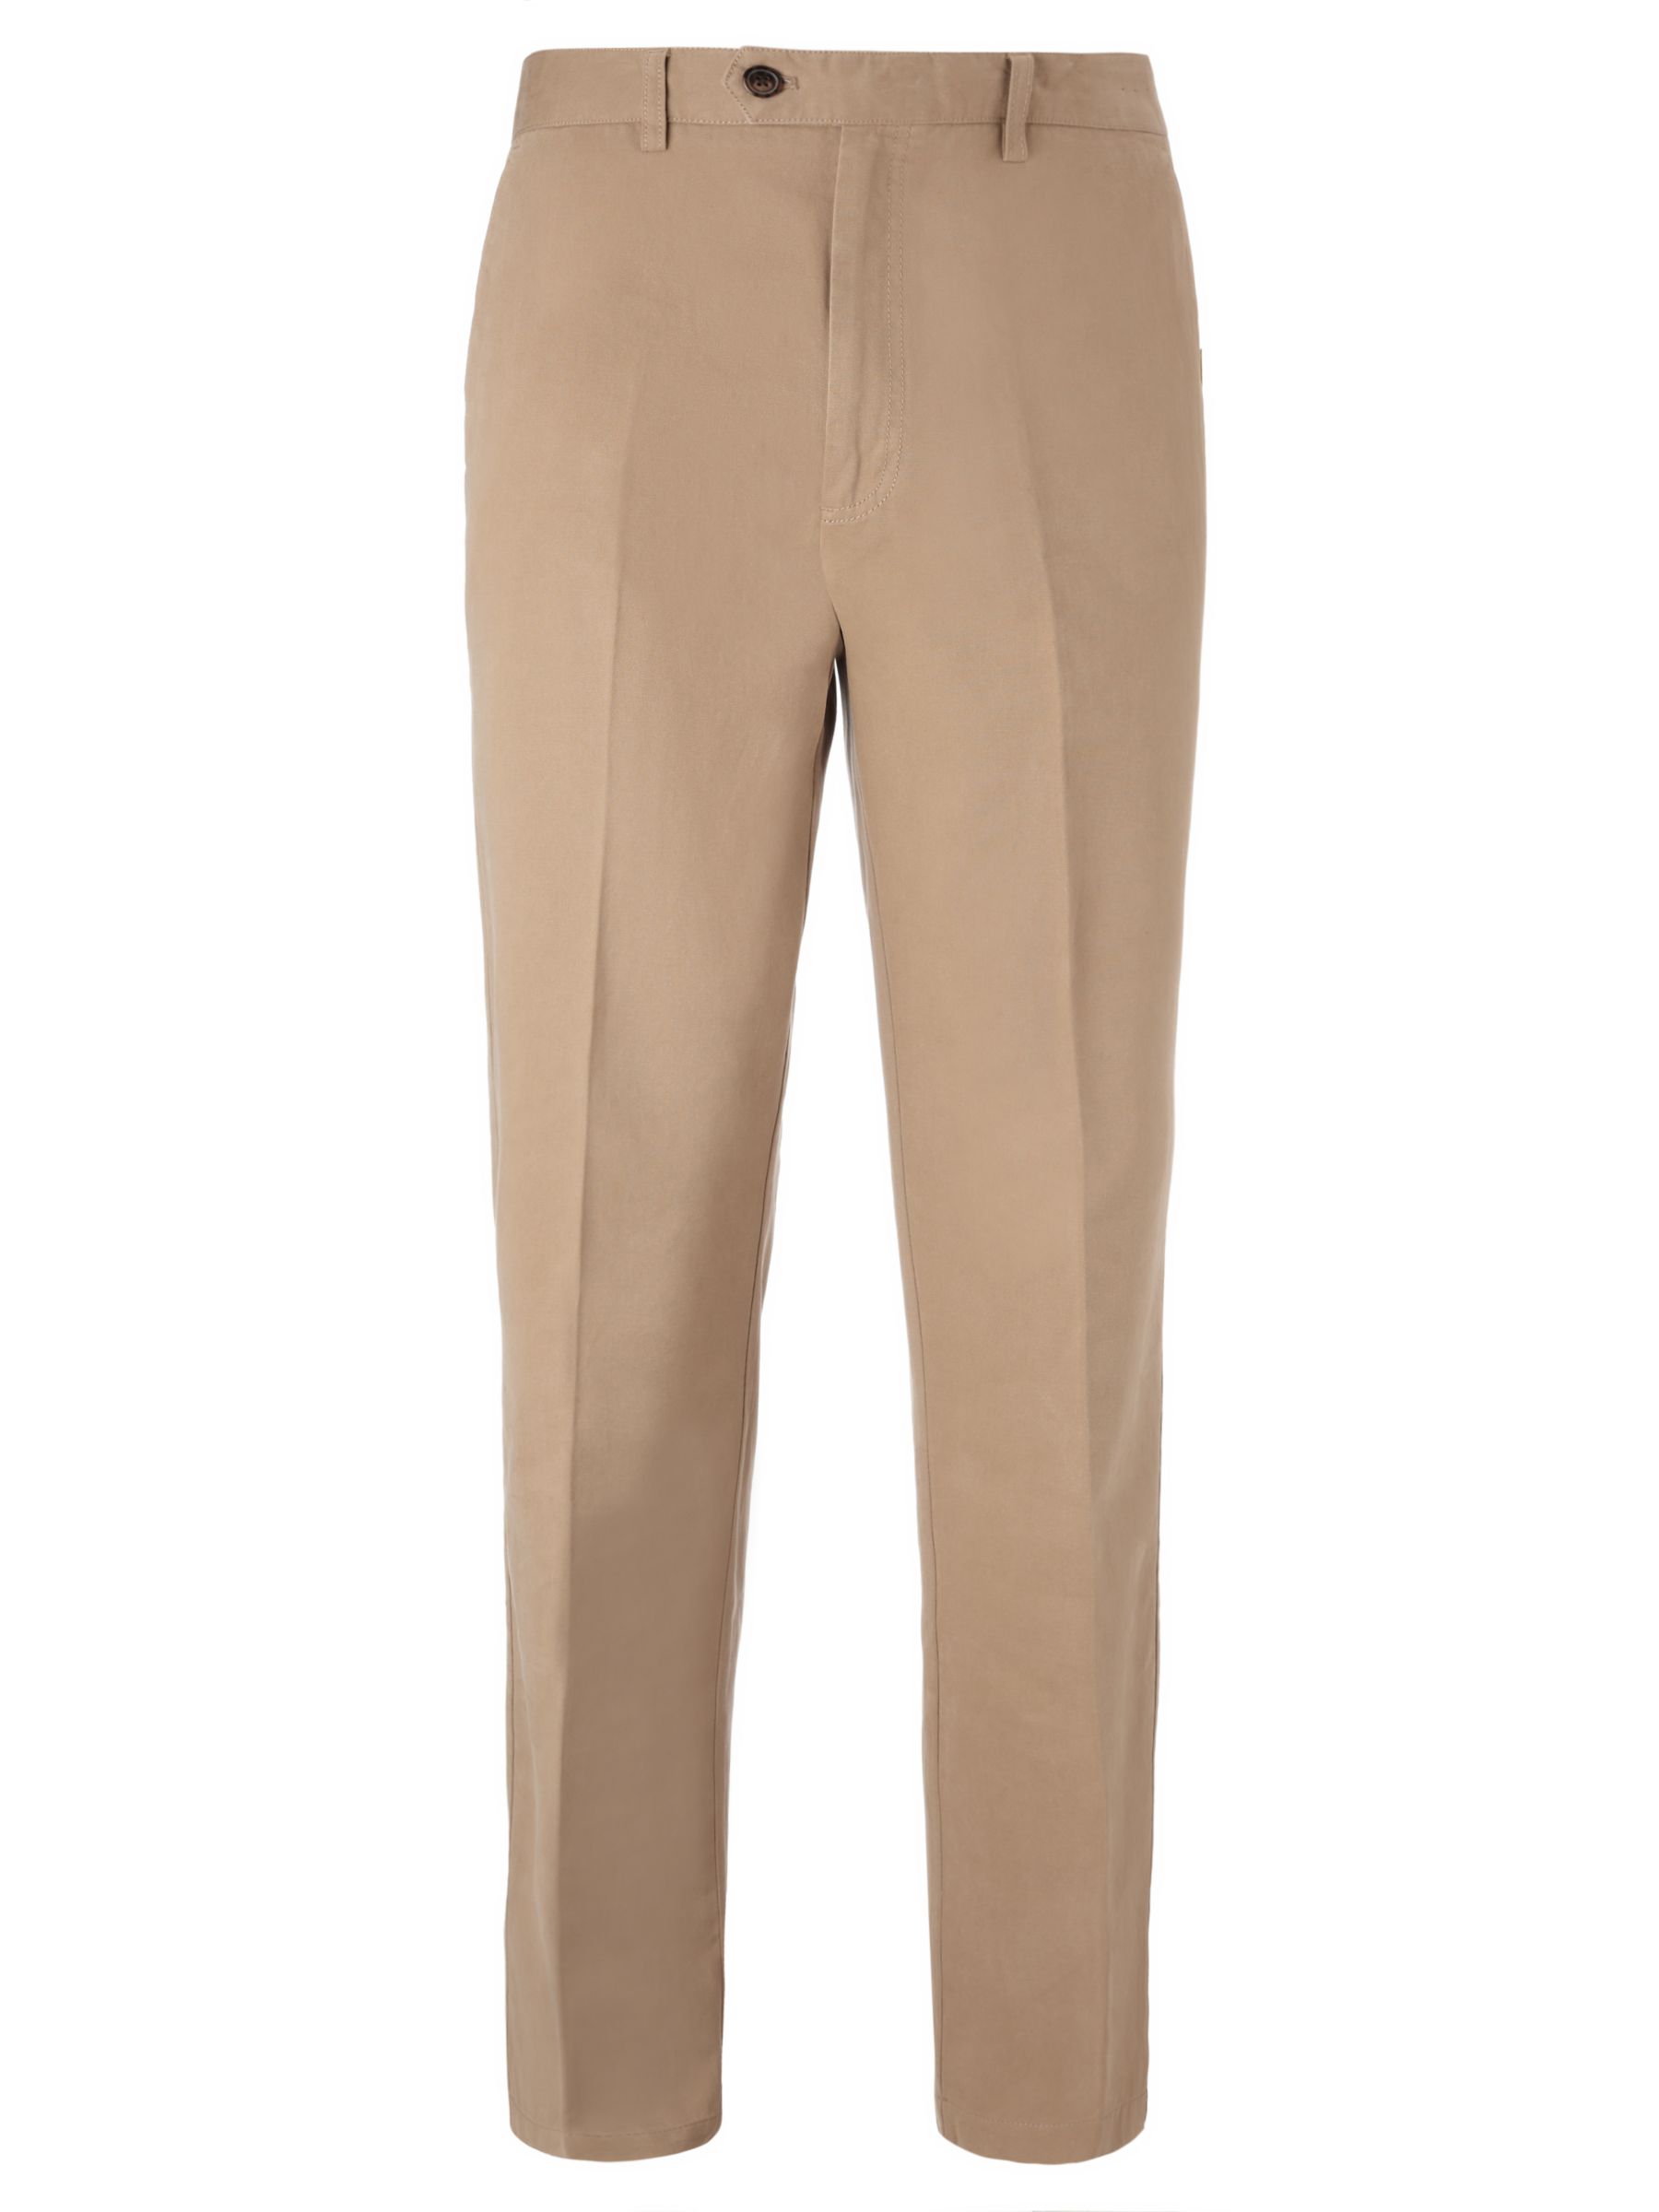 John Lewis & Partners Wrinkle Free Flat Front Trousers, Stone, 40R